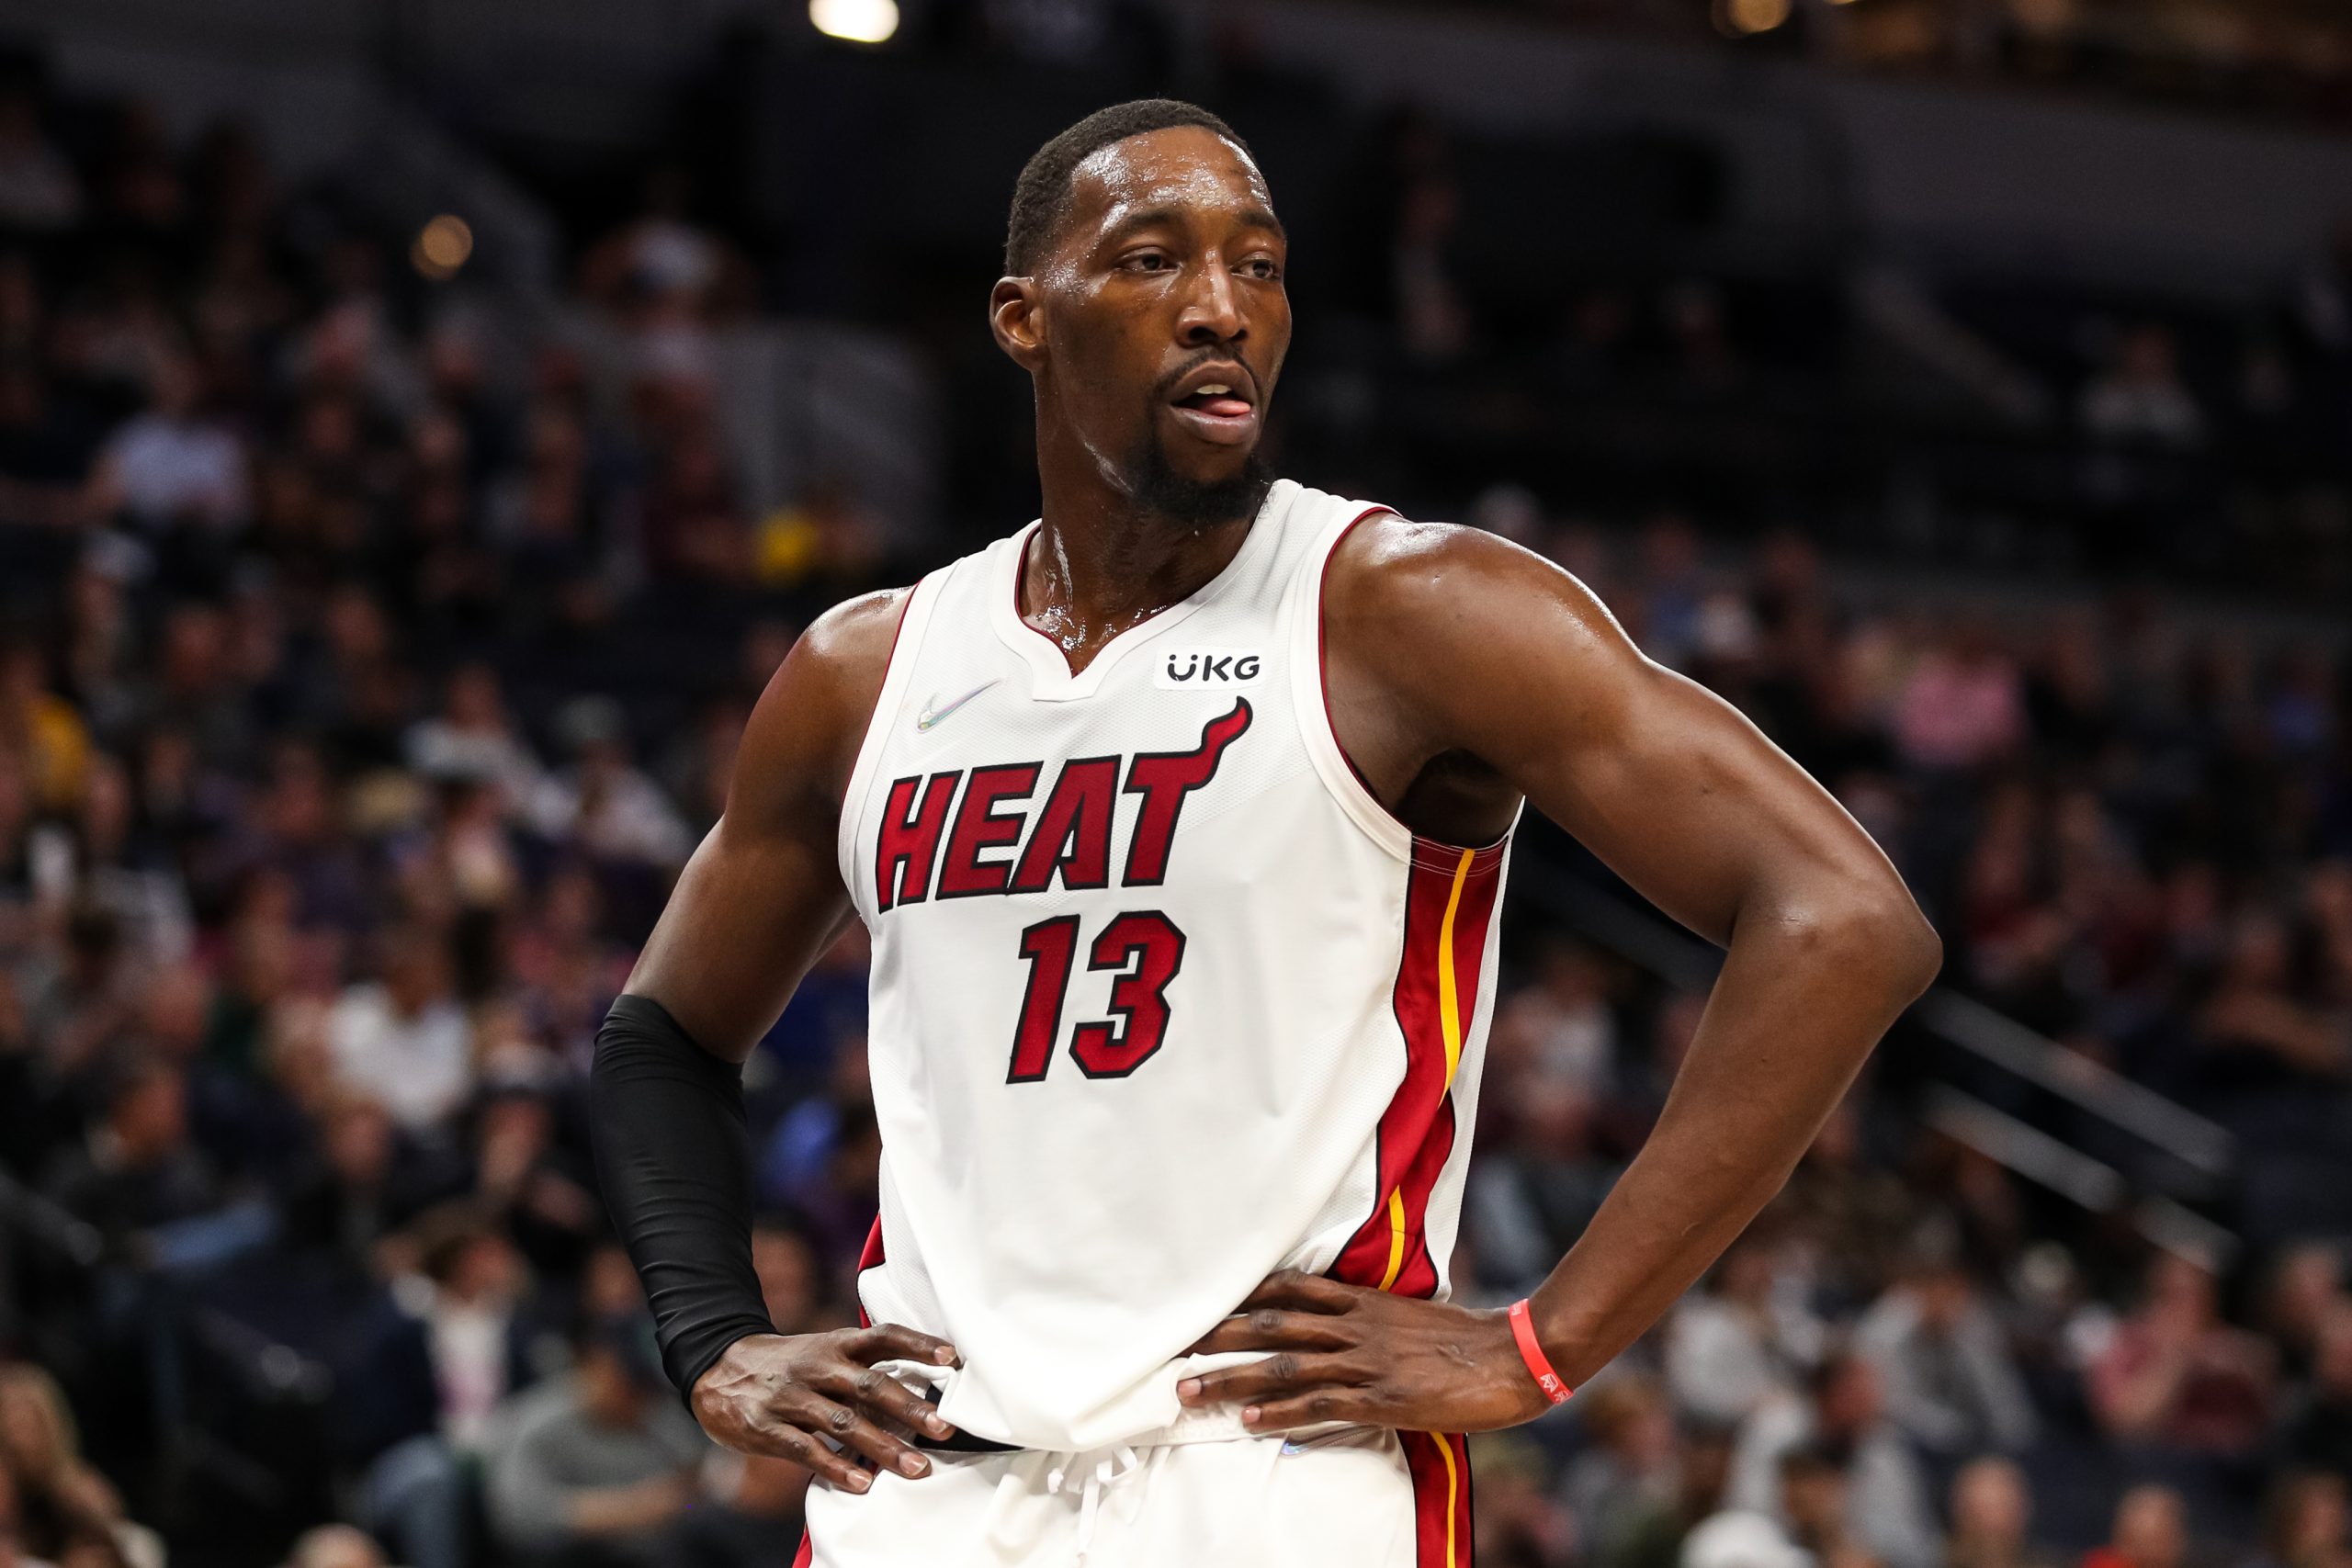 Miami Heat rising star Bam Adebayo rests during a break in the action during a recent game against the Minnesota Timberwolves.